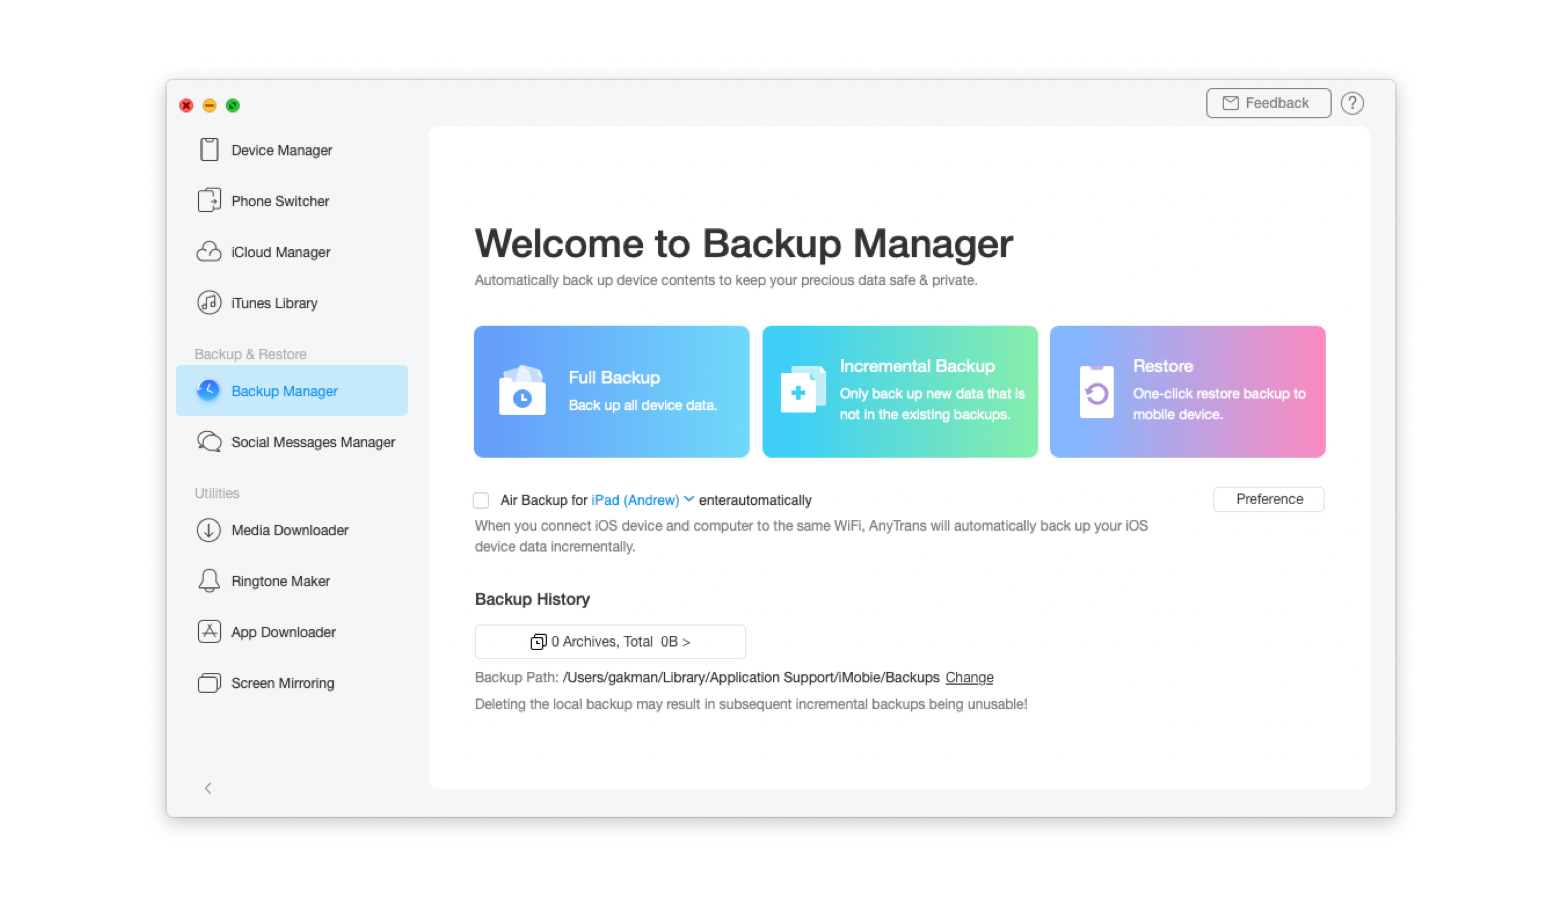 Choose what you want to backup - all data or only selected folders